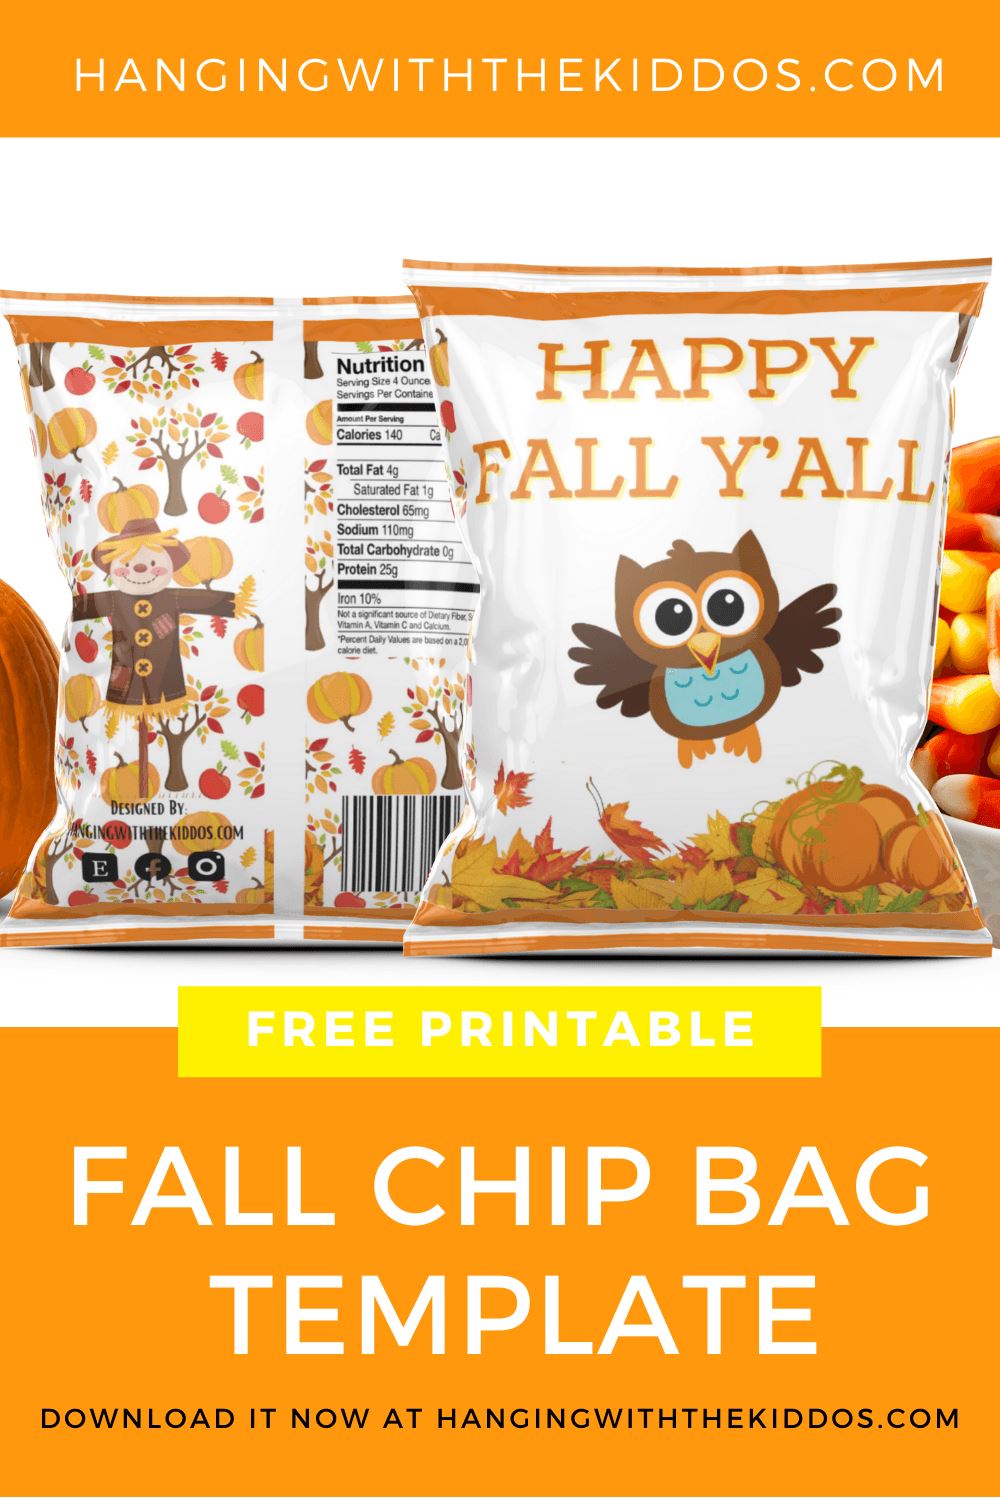 FALL CHIP BAG TEMPLATE